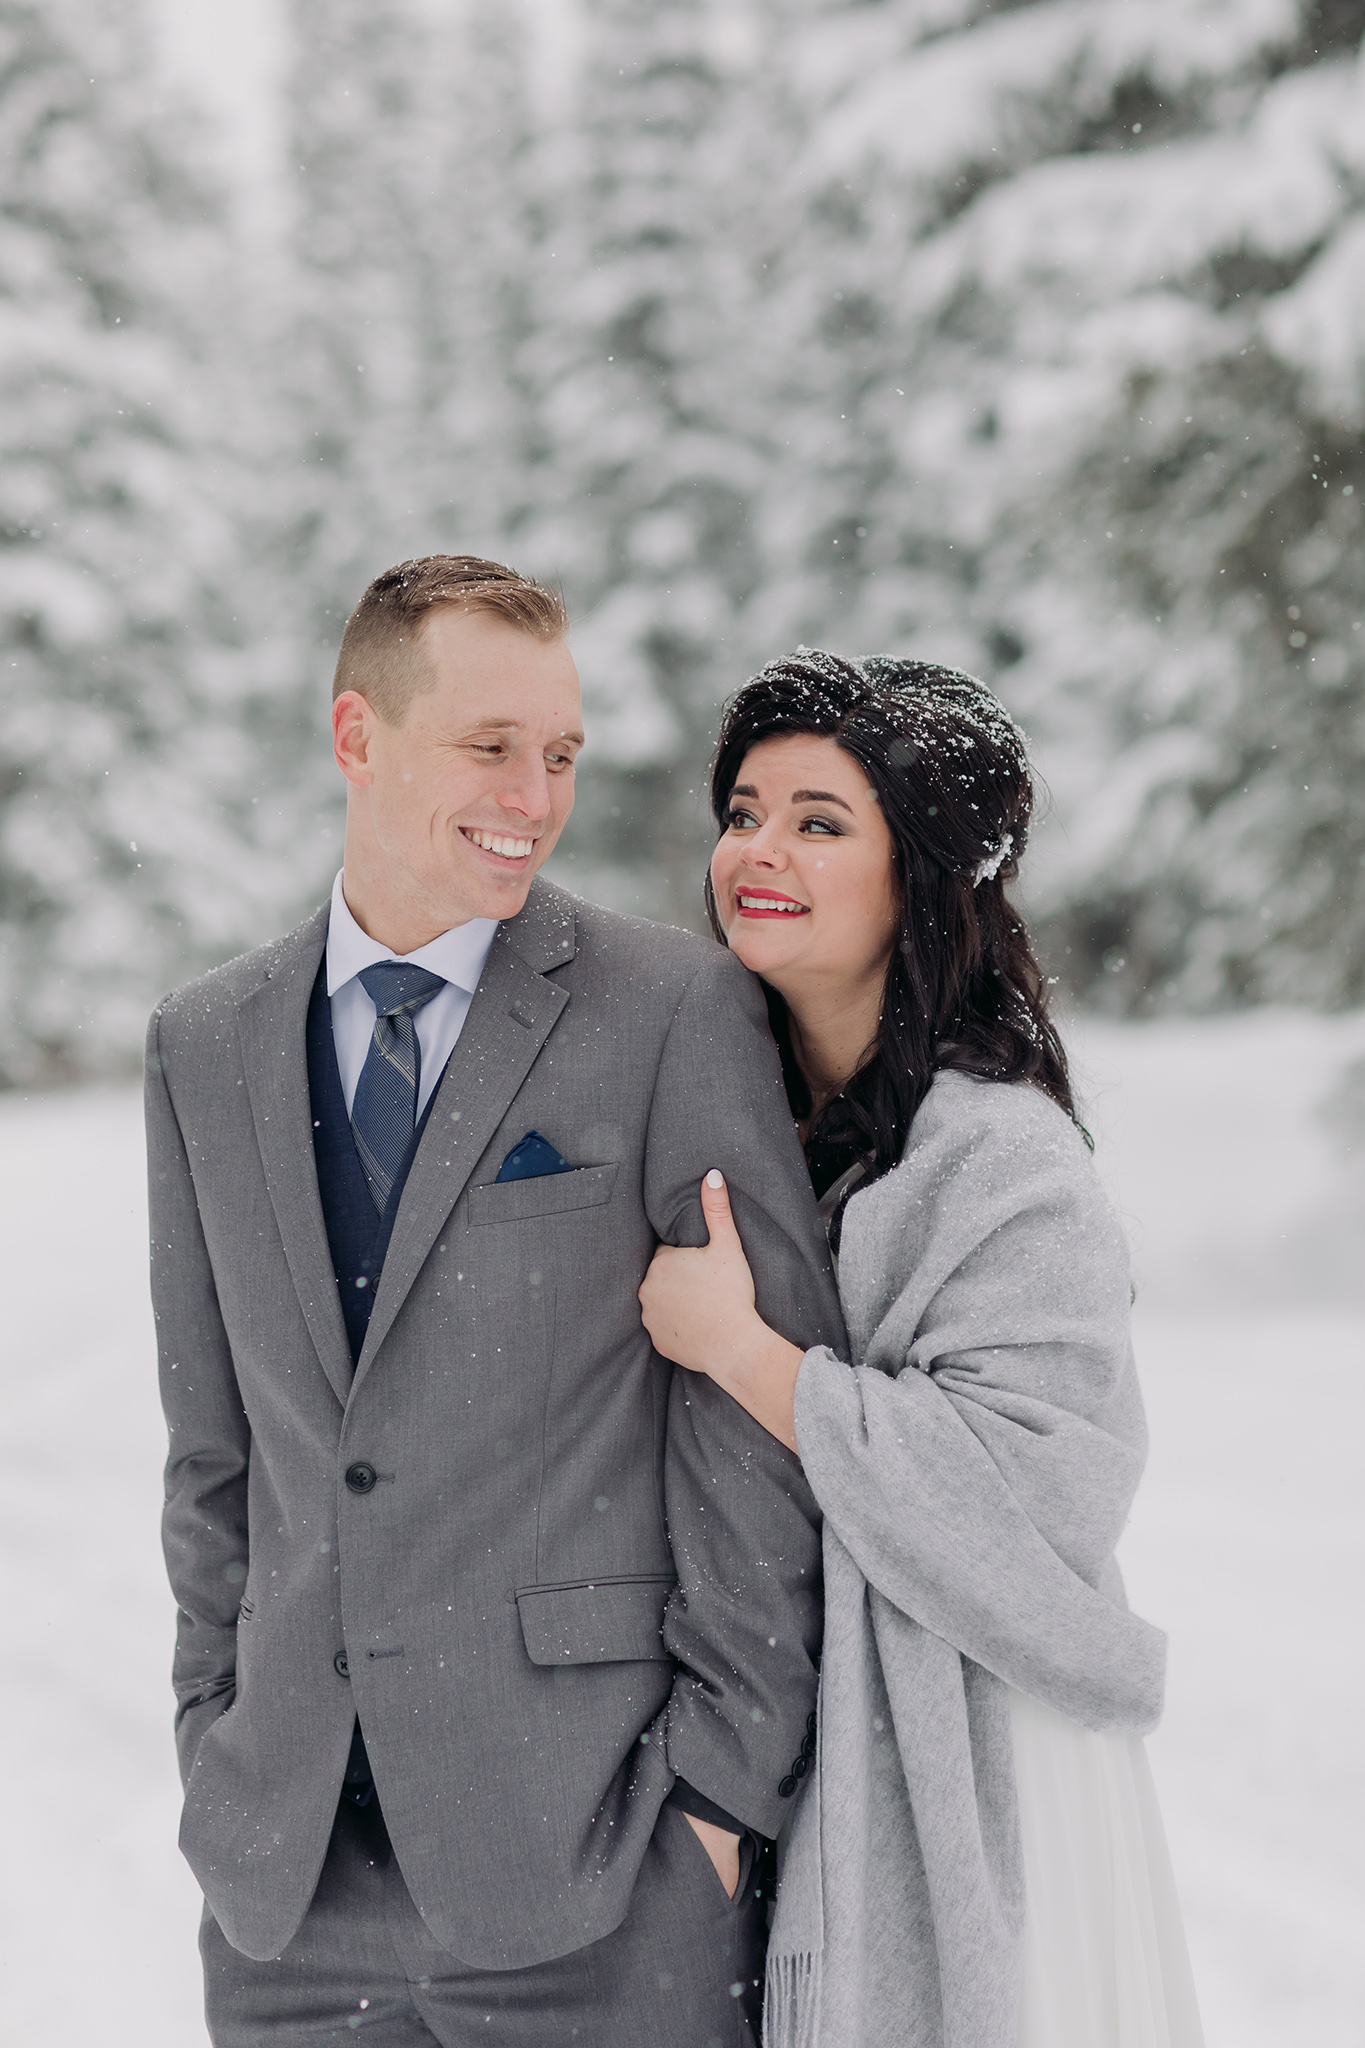 Cascade Ponds winter wedding portraits in a snow storm in Banff National Park in the Canadian Rocky Mountains photographed by ENV Photography